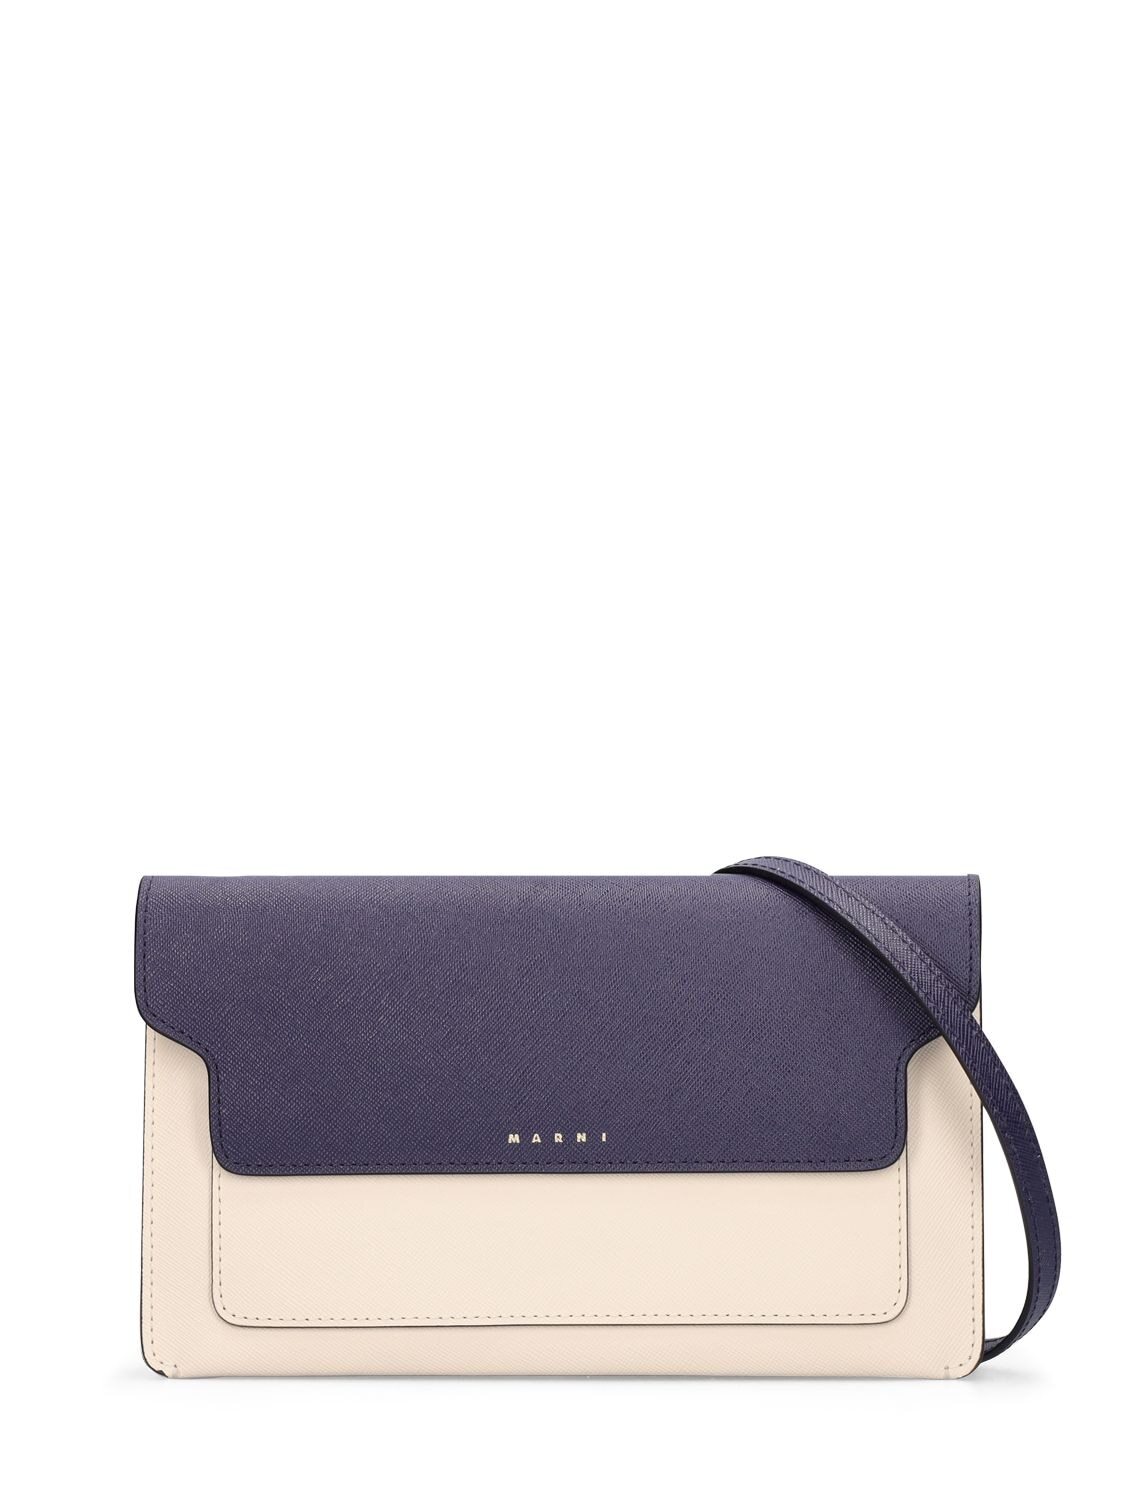 MARNI 3-compartment Leather Shoulder Bag in blue / white